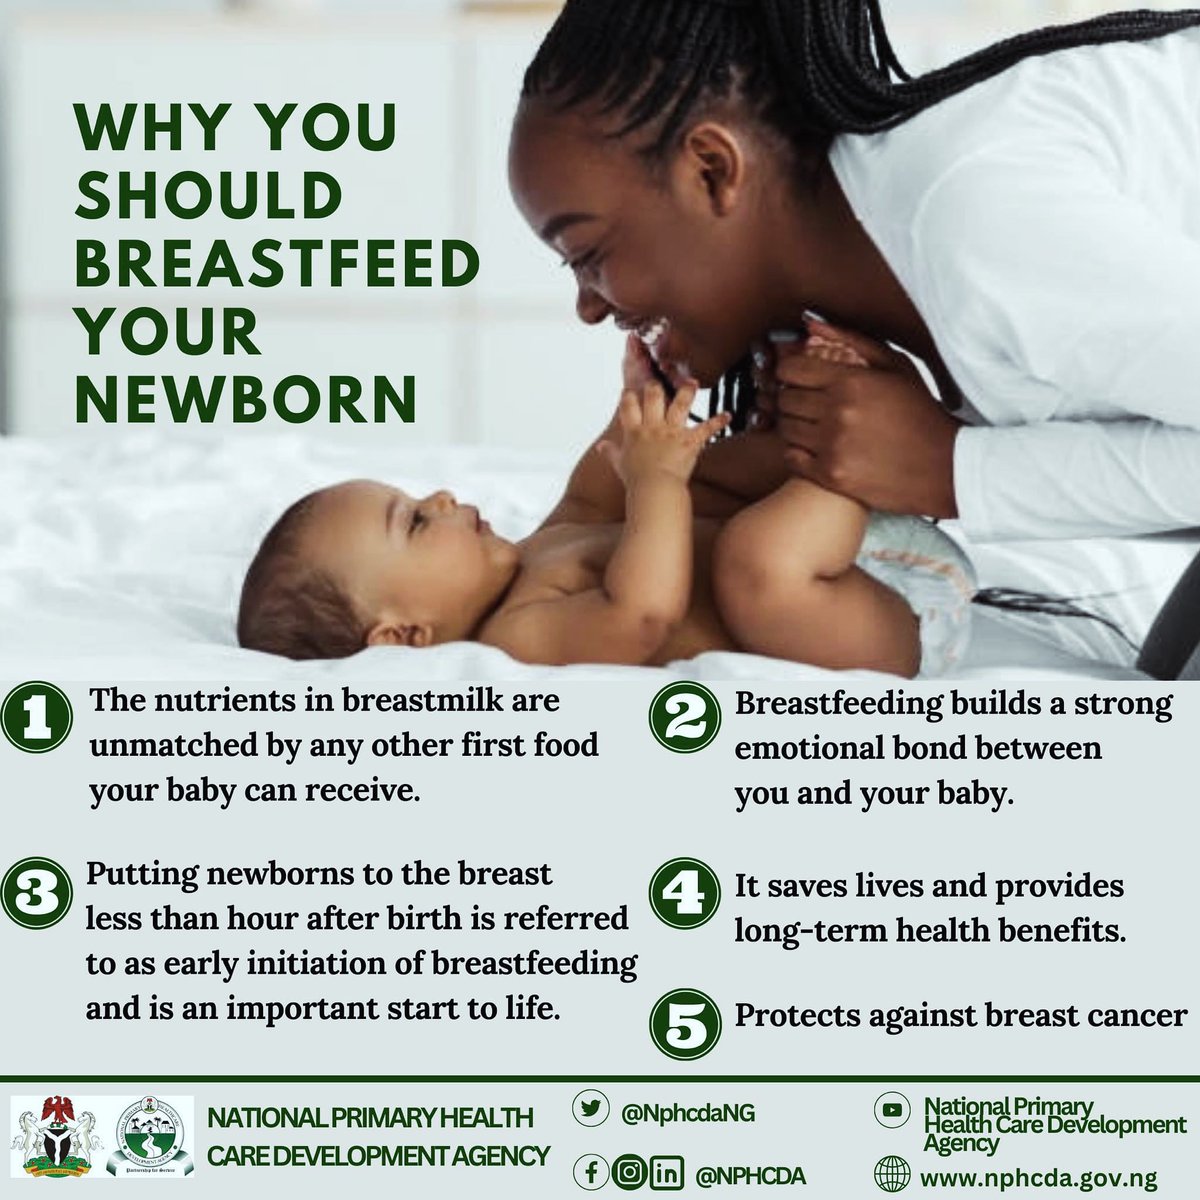 There is no need to give your baby water during the first 6 months as Breast Milk contains enough water and all the nutrients the baby needs to grow well and develop. #ExclusiveBreastfeeding